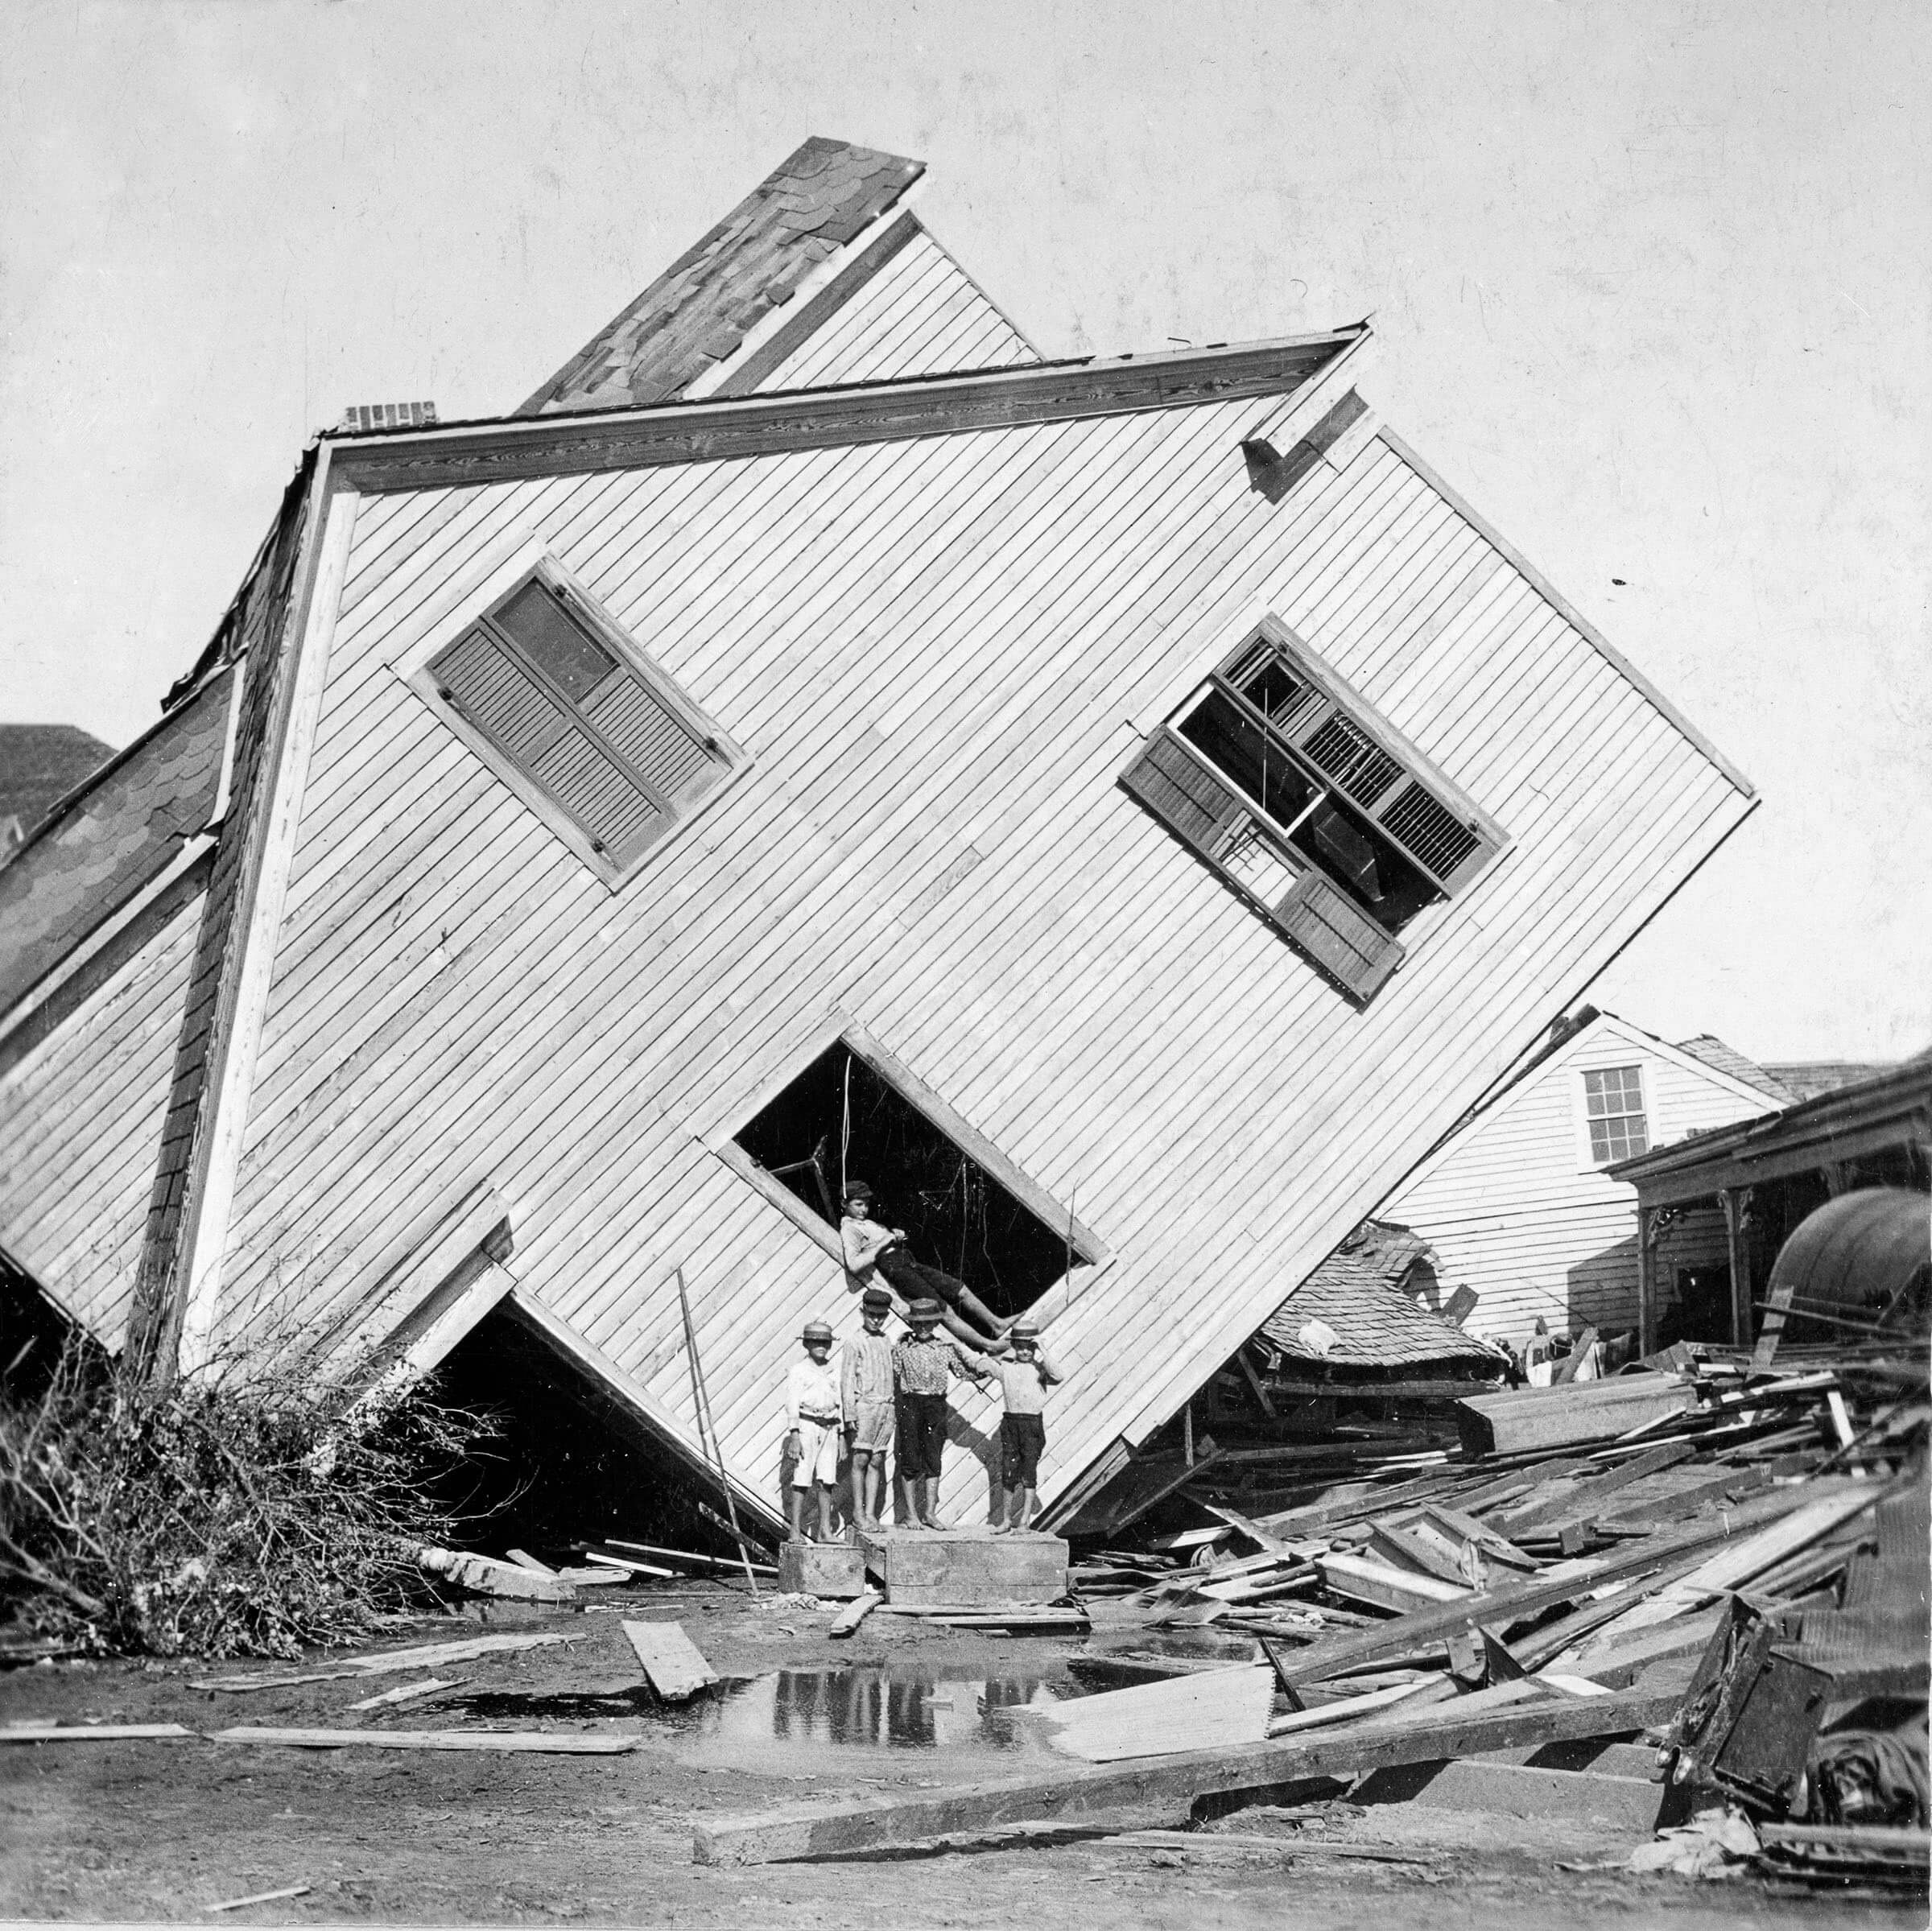 A house turned to its side during a hurricane